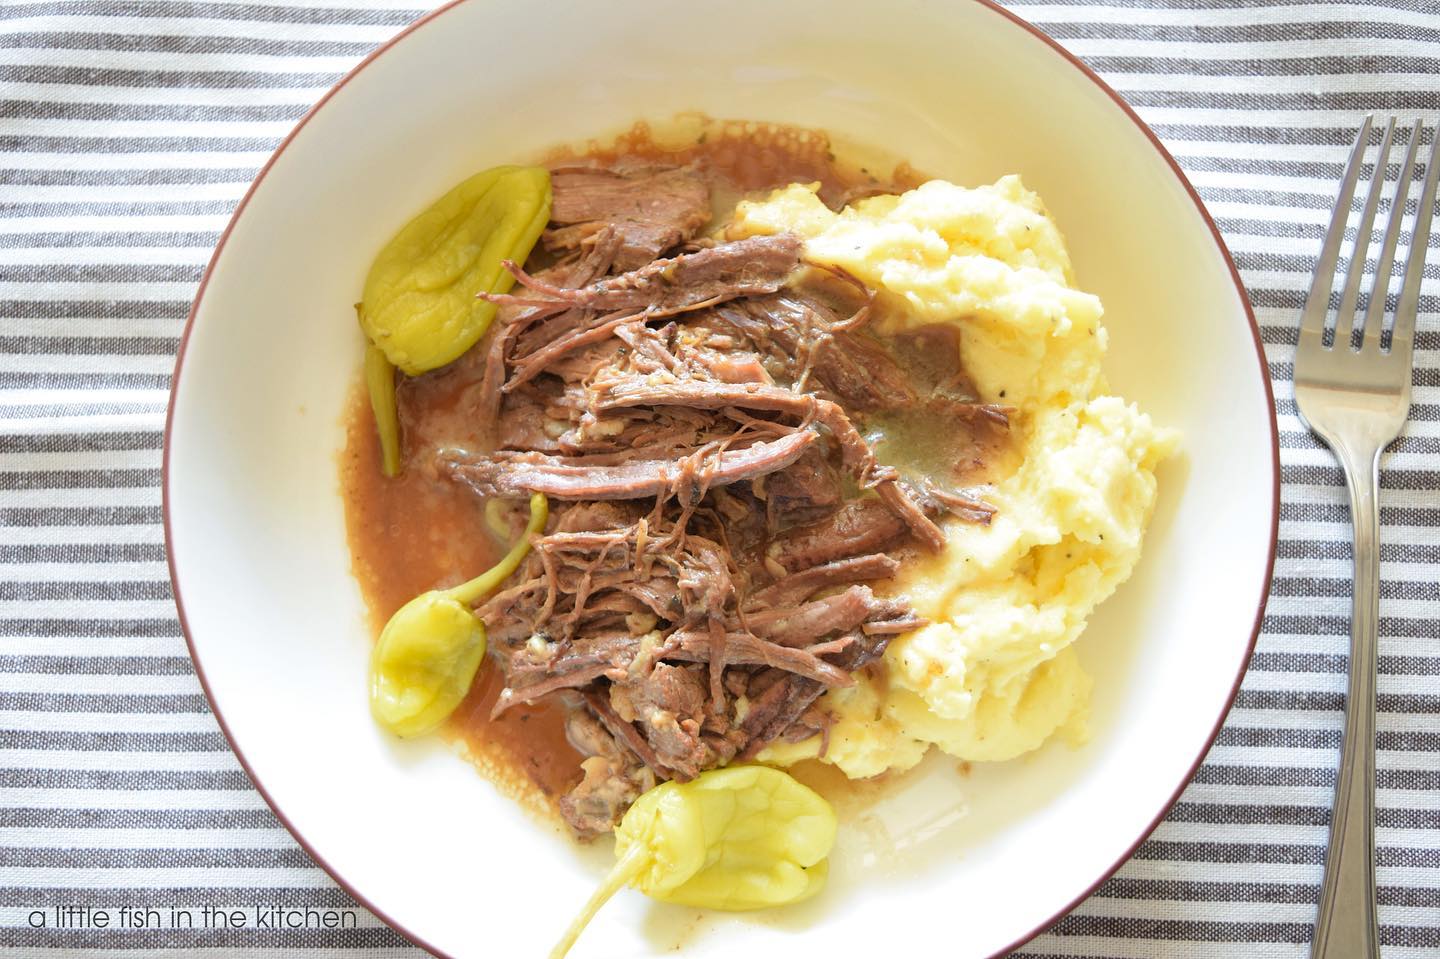 Hey there IG friends! 👋🏻💘It’s been a while, but you’ll be seeing more of me here nowadays 😀. Hope that’s all good with you! I have updates and lots of recipes coming up to share!! Firstly, the recipe for this classic, rich, delicious Slow Cooker Mississippi Pot Roast is what I’ve shared about in my newest blog post and video!! I’ve got my eyes 👀on my slow cooker for the upcoming fall season!! 🍲 Link to the Mississippi Pot Roast recipe and video is in my bio, I hope you’ll check it out! It’s a delicious main dish!! #mississippipotroast #slowcookerrecipes #slowcookerweeknights #thefeedfeed #huffposttaste #buzzfeast #bghfood #classicrecipes #delicious #whatsfordinner #whatsinyourslowcooker